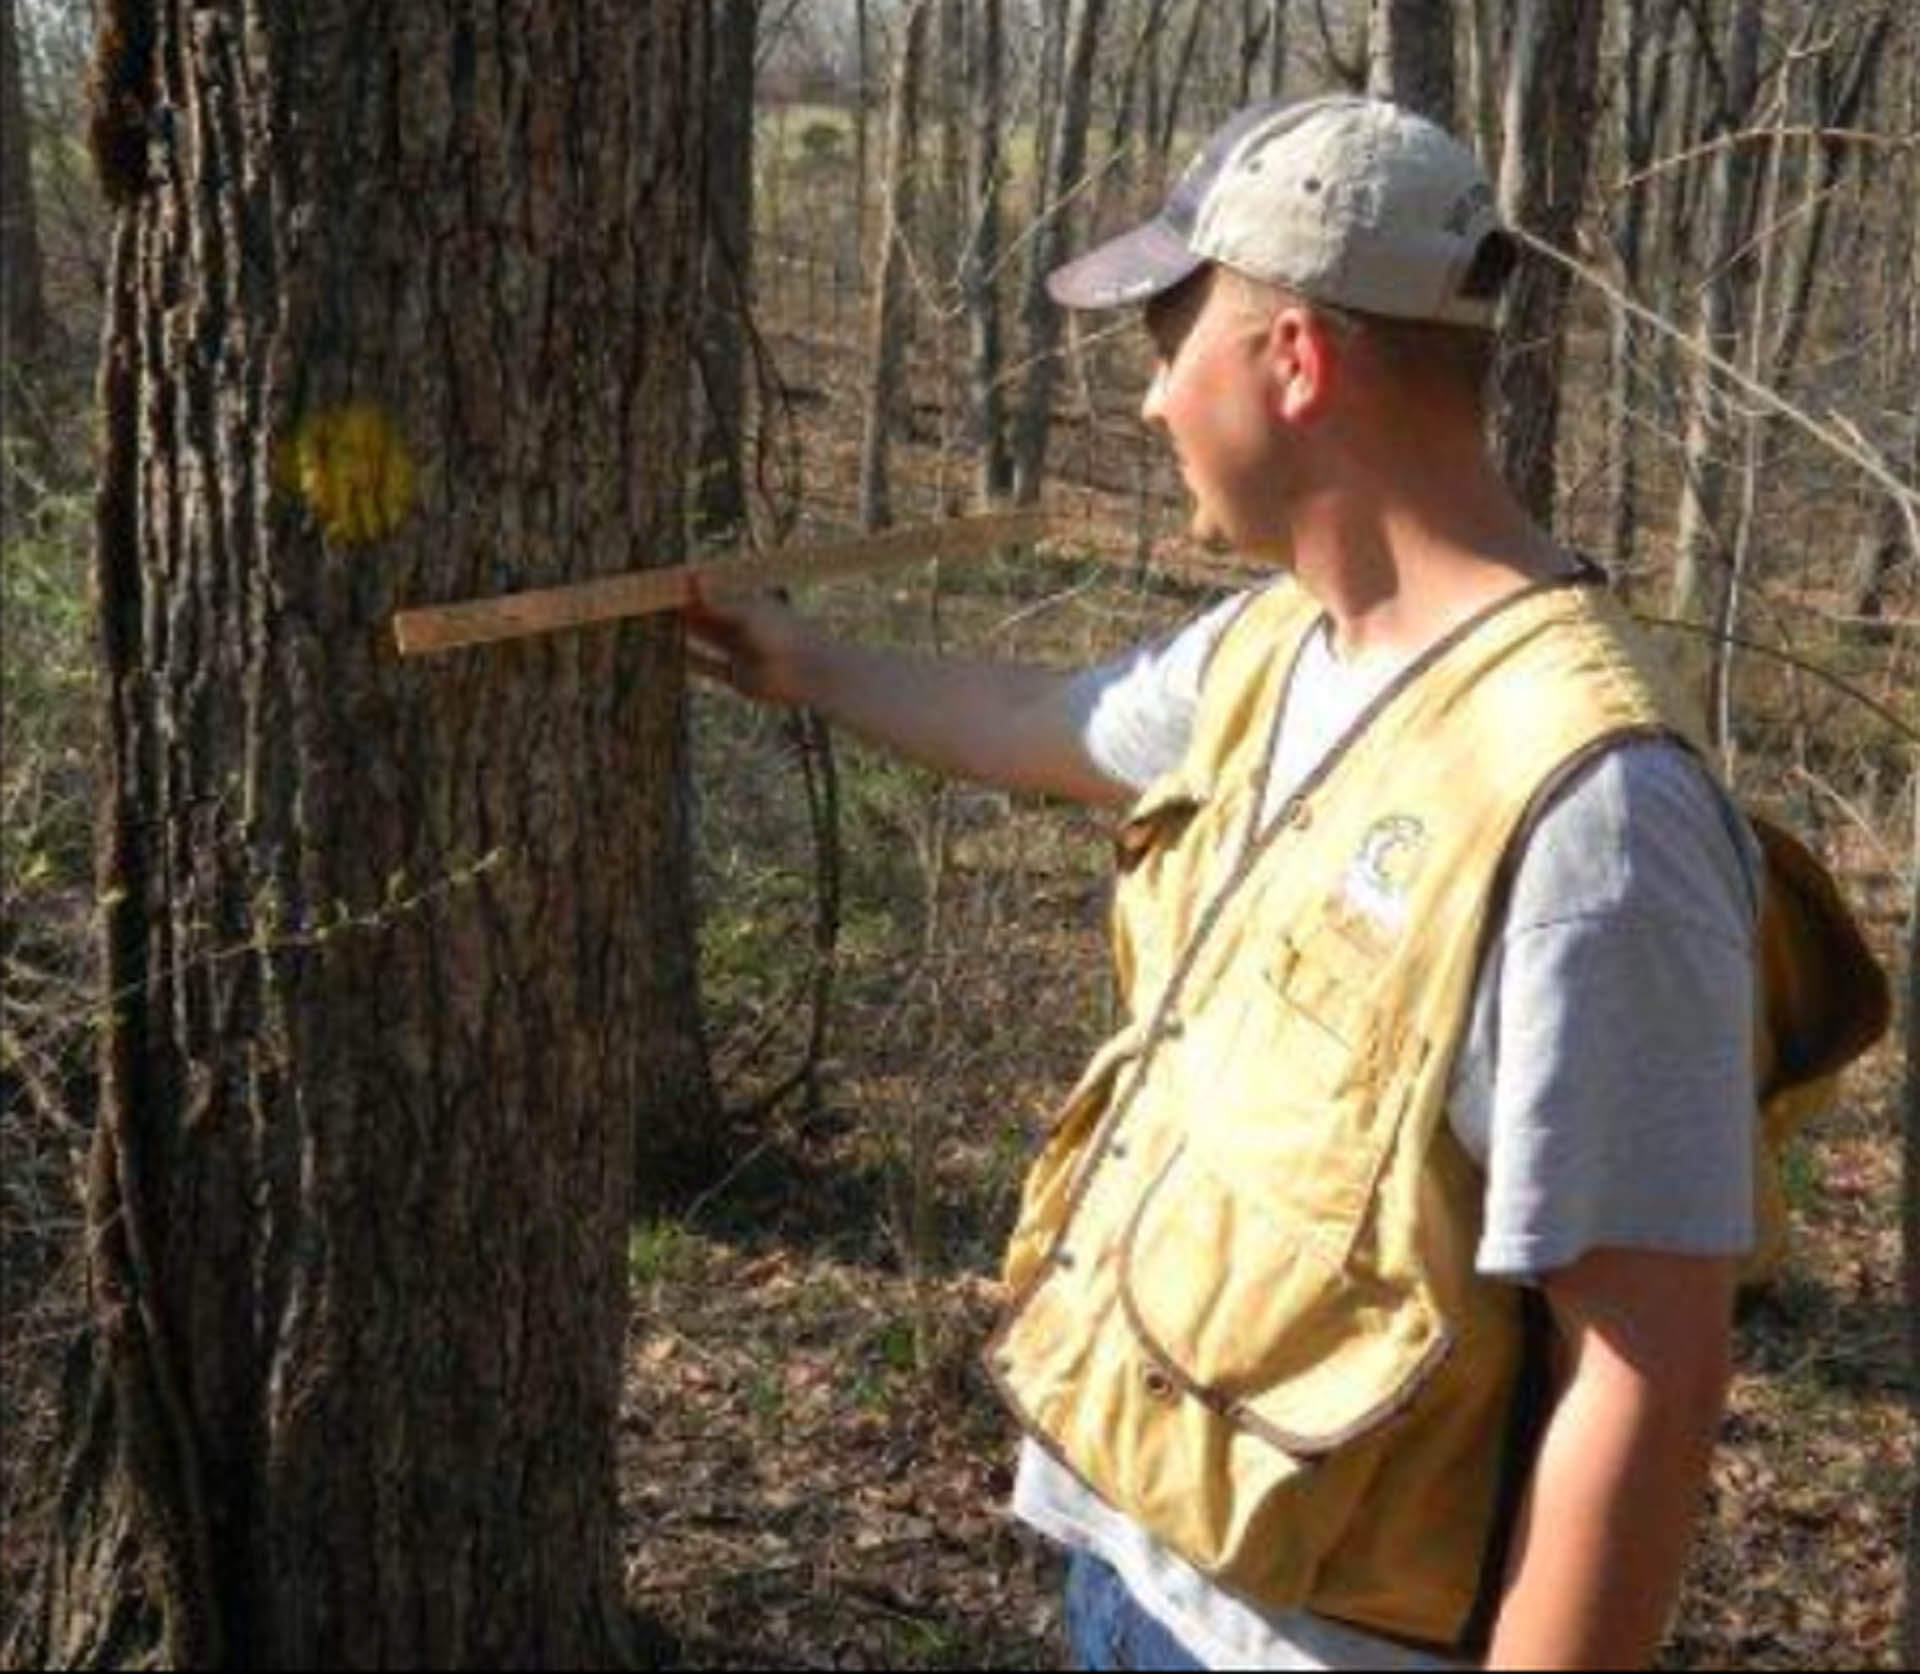 Heartland Forest Consulting LLC professional advice assistance on managing trees and forested resources in the Ashland MO and surrounding areas 14